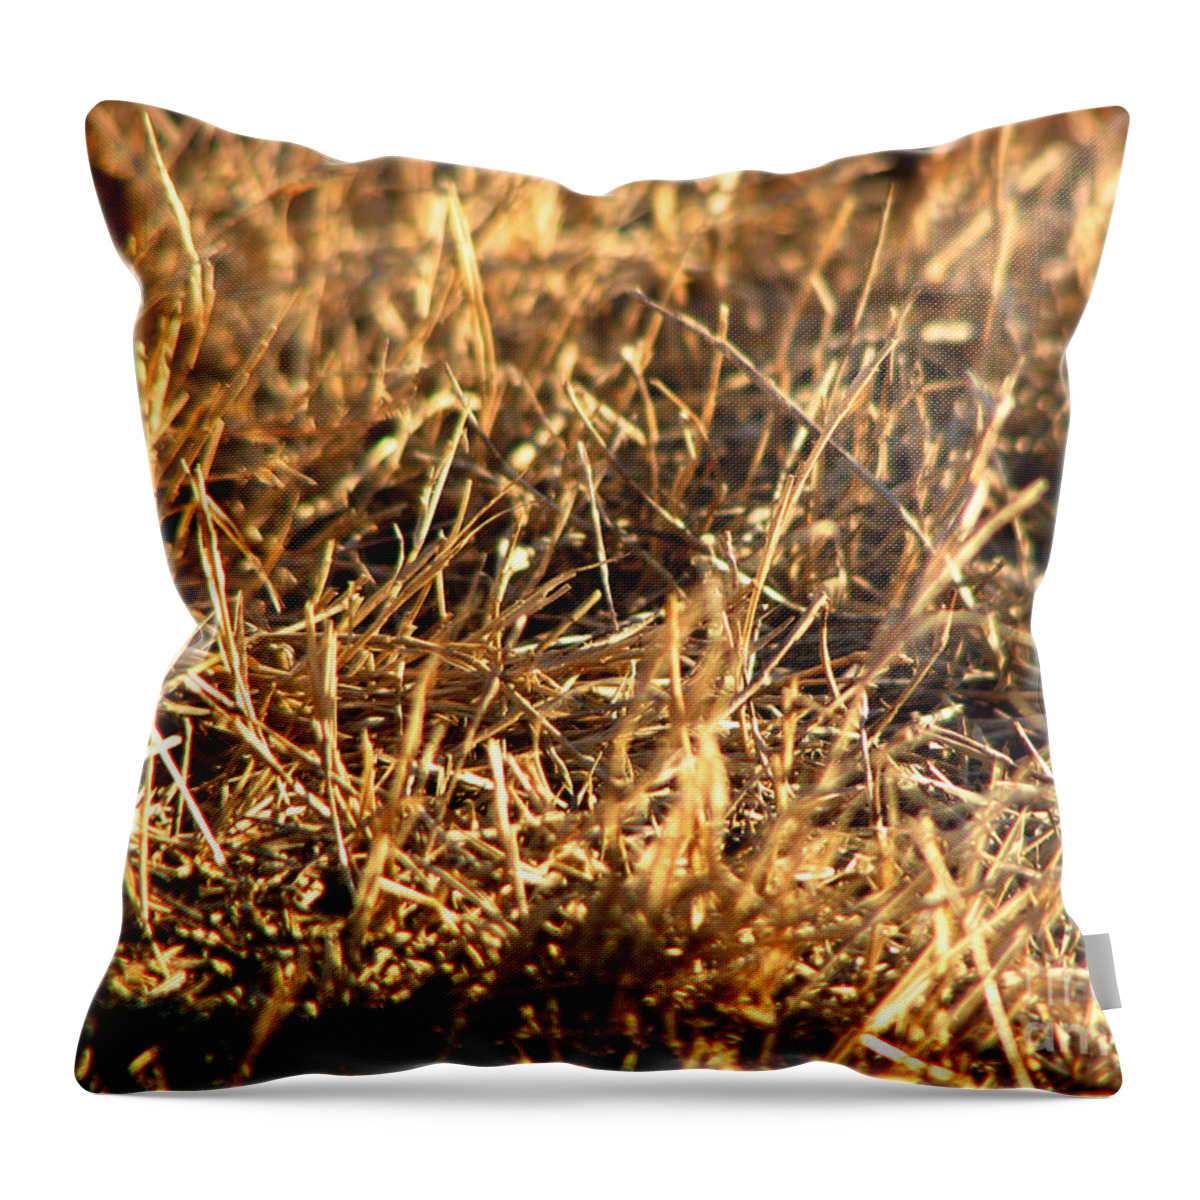 Grass Throw Pillow featuring the photograph Mirrors by Amanda Barcon